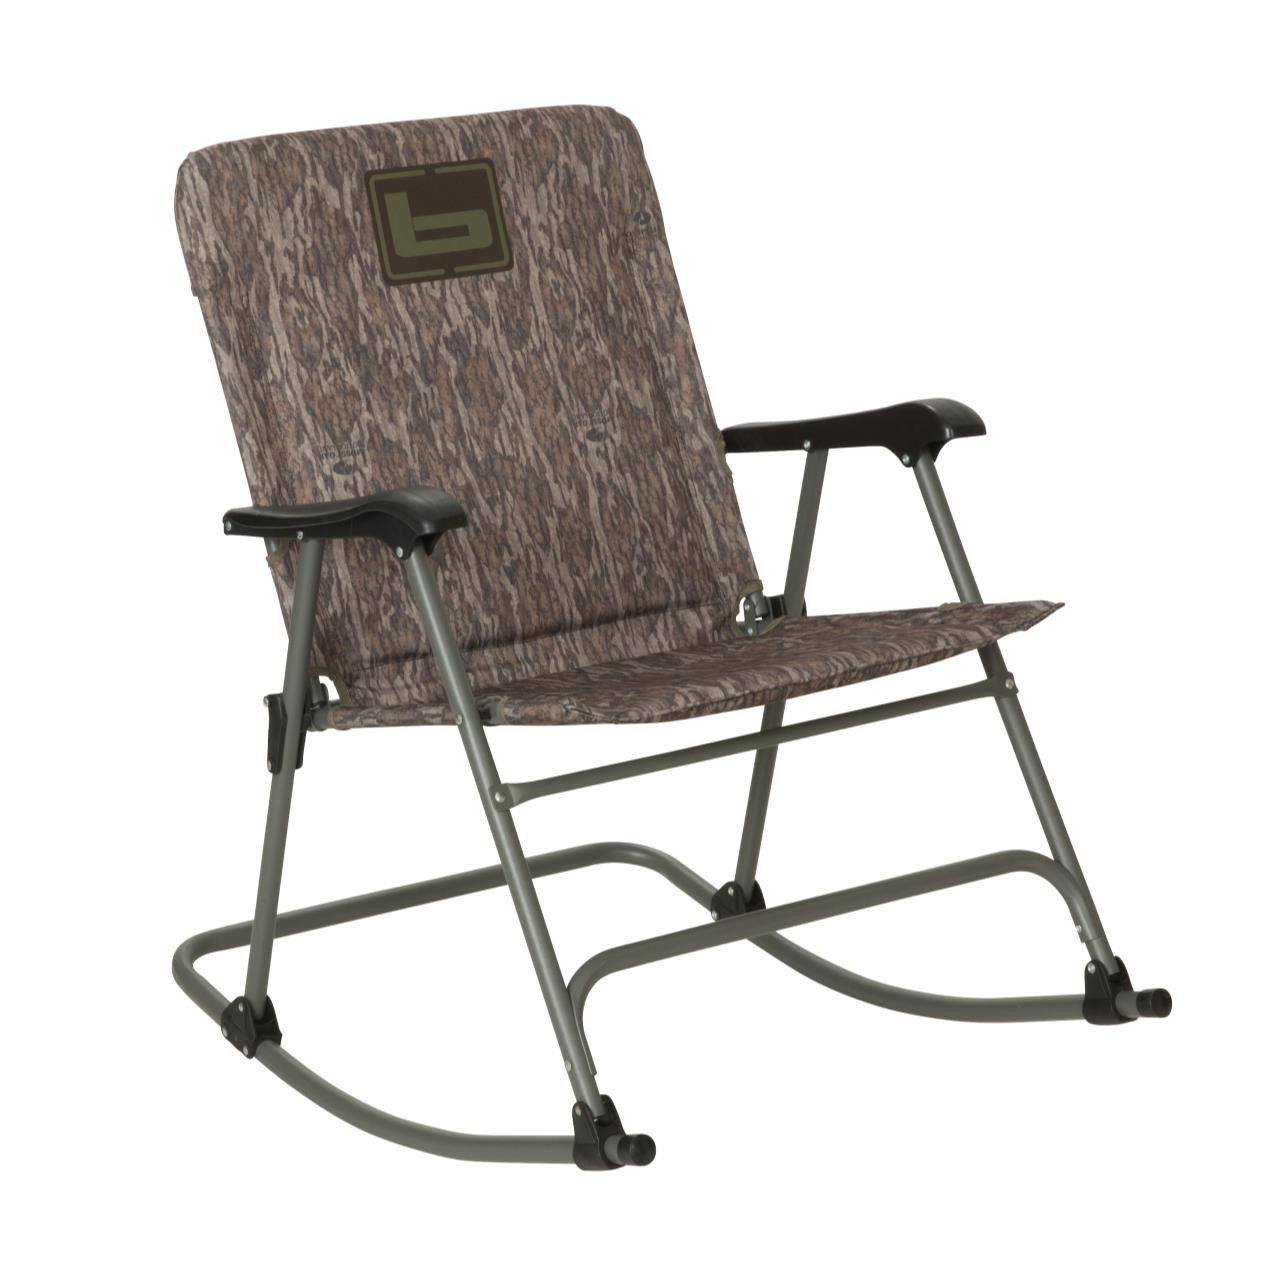 Banded Folding Rocking Chair - Bottomland - Presleys Outdoors